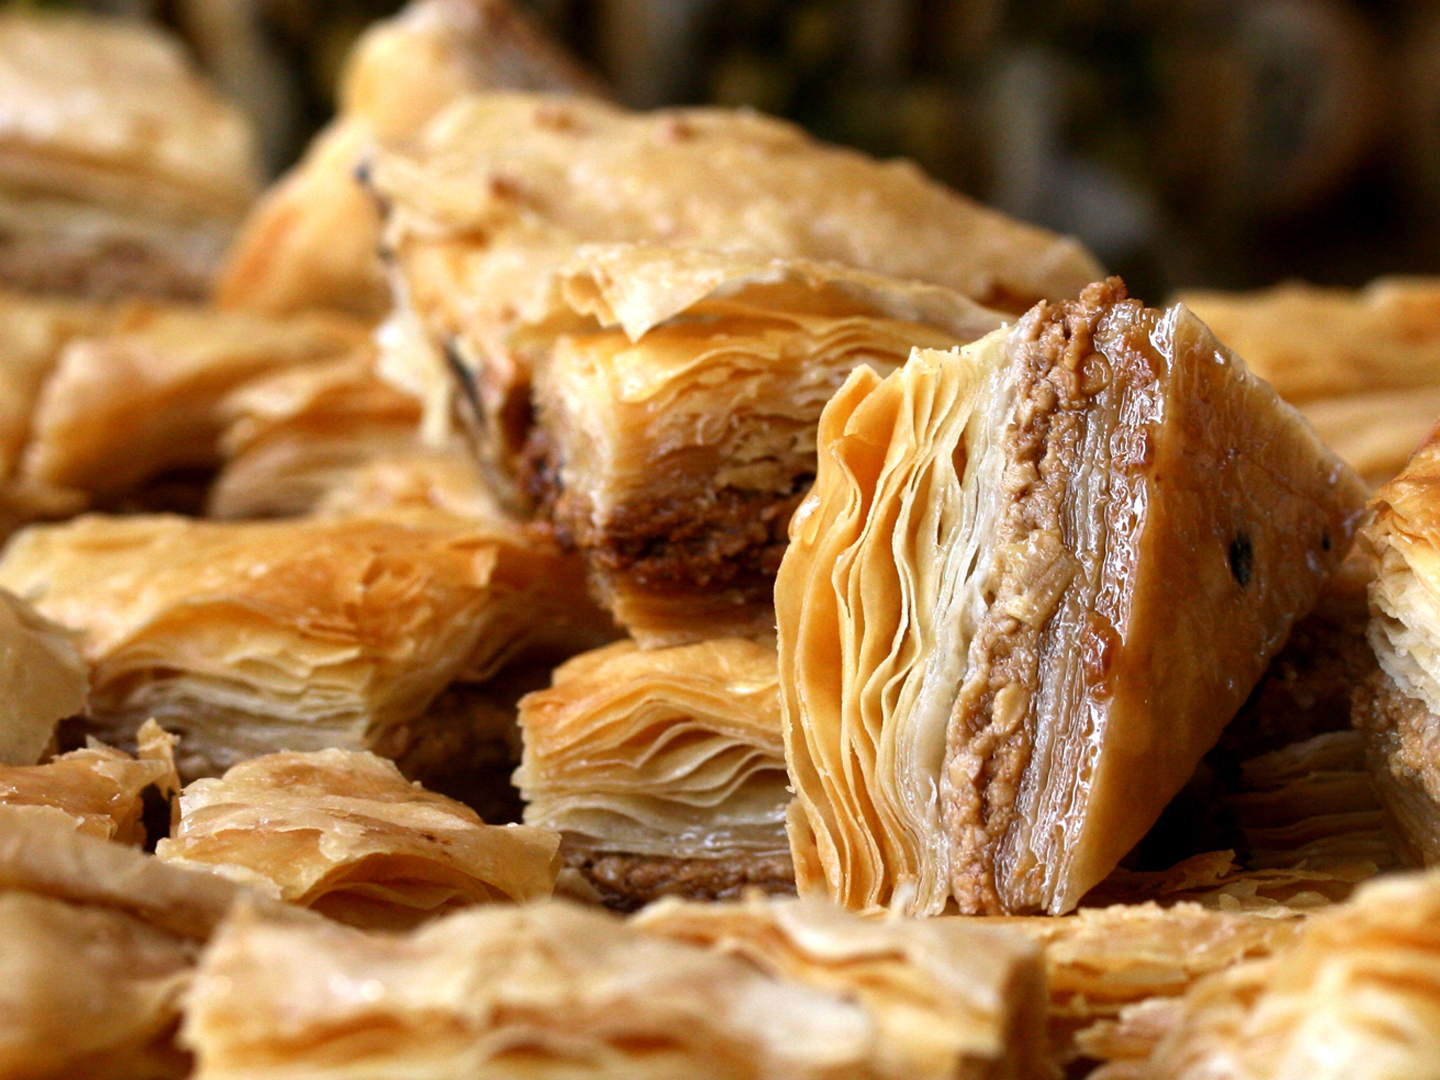 Healthy facts of Baklava a dish